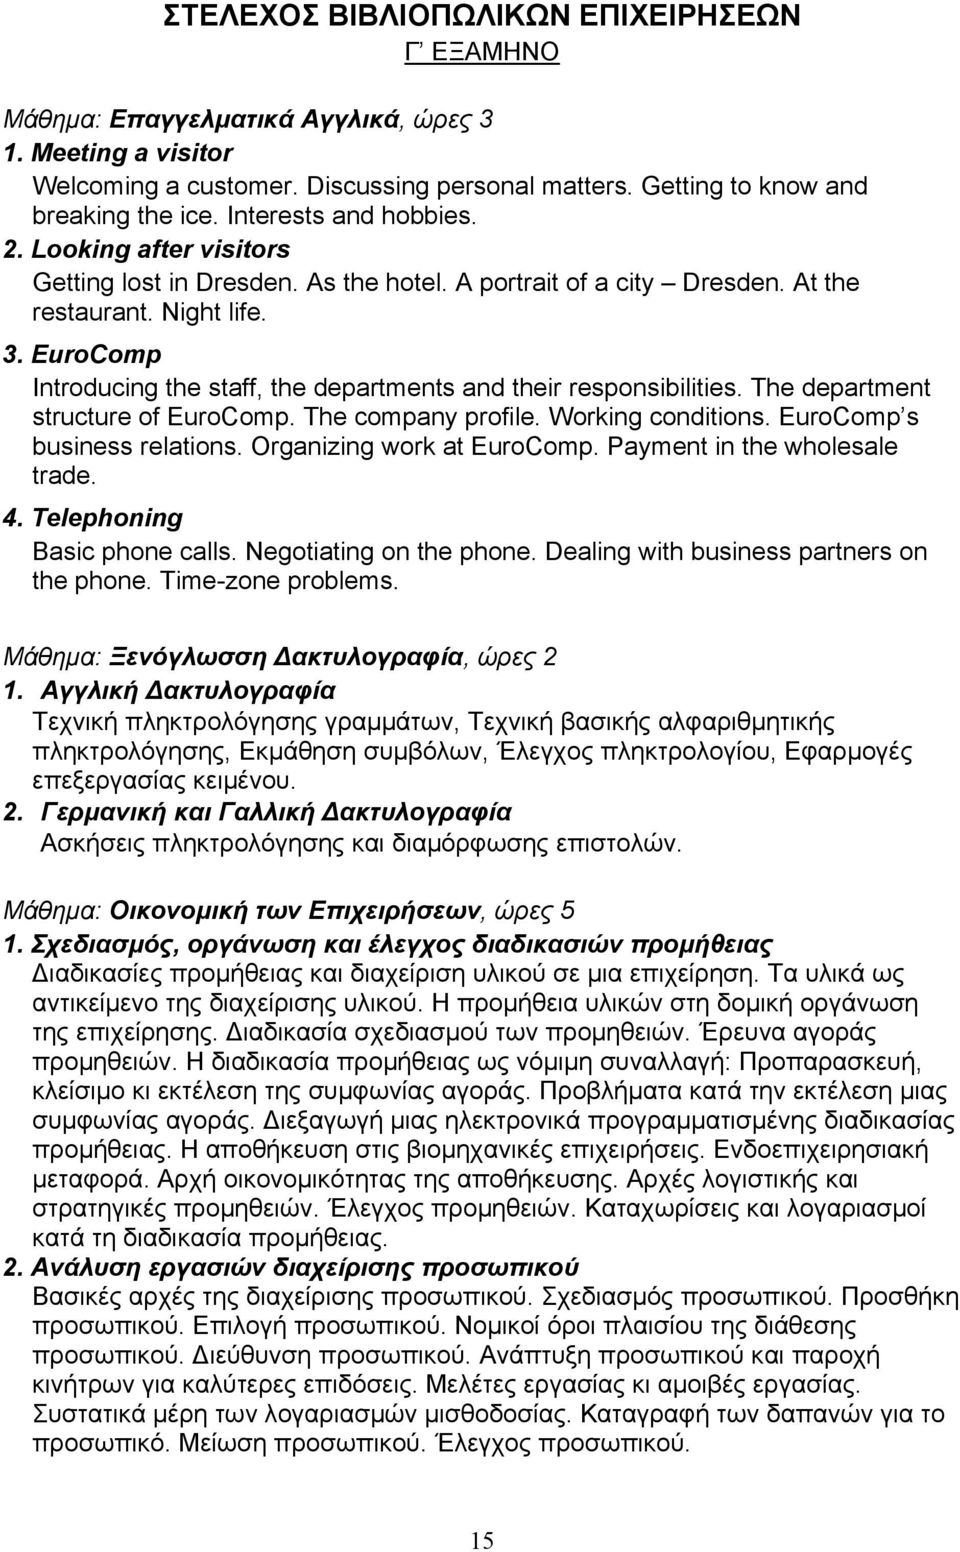 EuroComp Introducing the staff, the departments and their responsibilities. The department structure of EuroComp. The company profile. Working conditions. EuroComp s business relations.